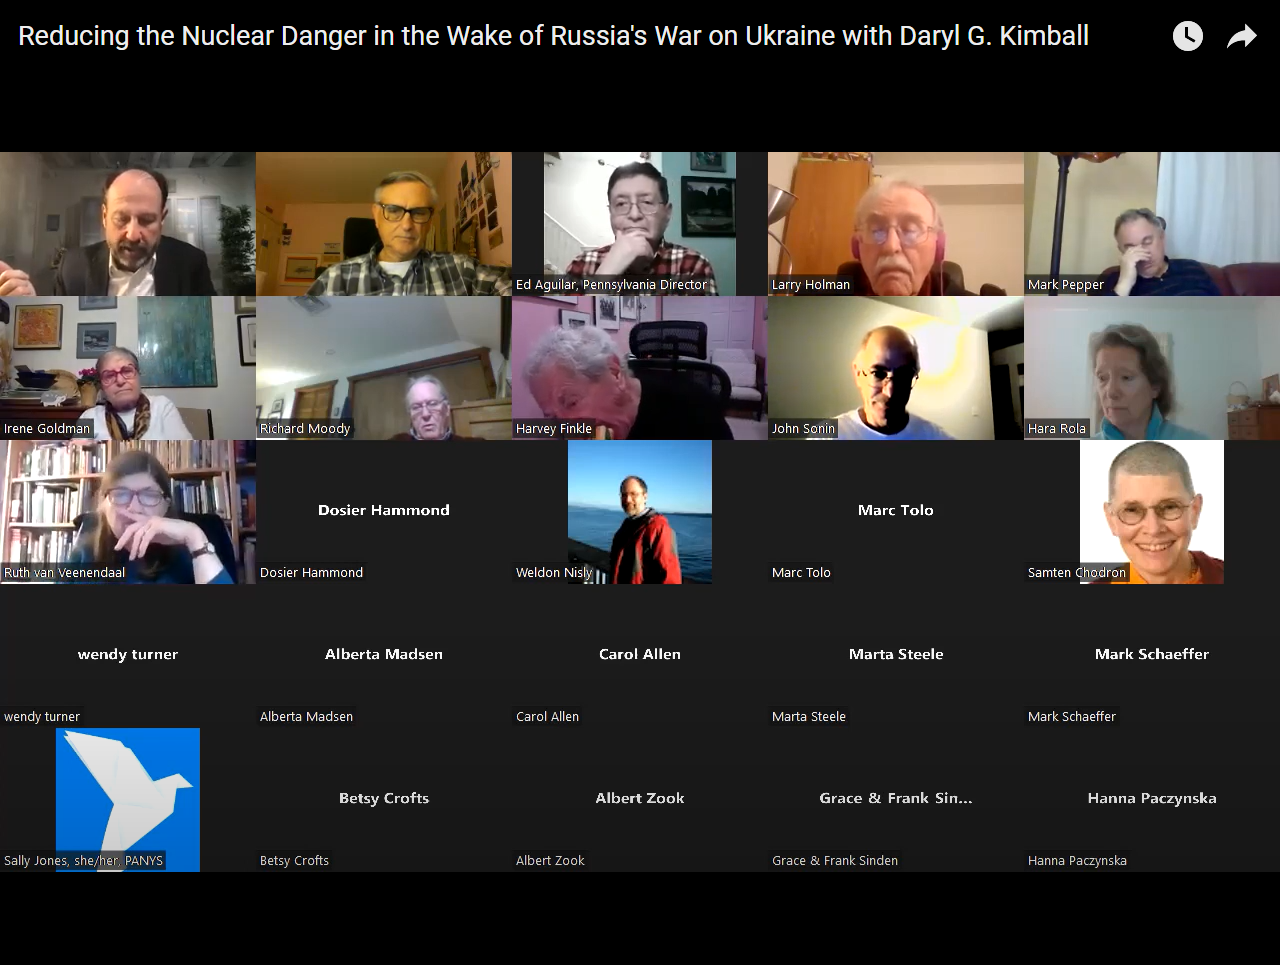 Reducing the Nuclear Danger in the Wake of Russias War on Ukraine with Daryl G. Kimball YouTube Google Chrome 12 19 2022 11 57 17 AM